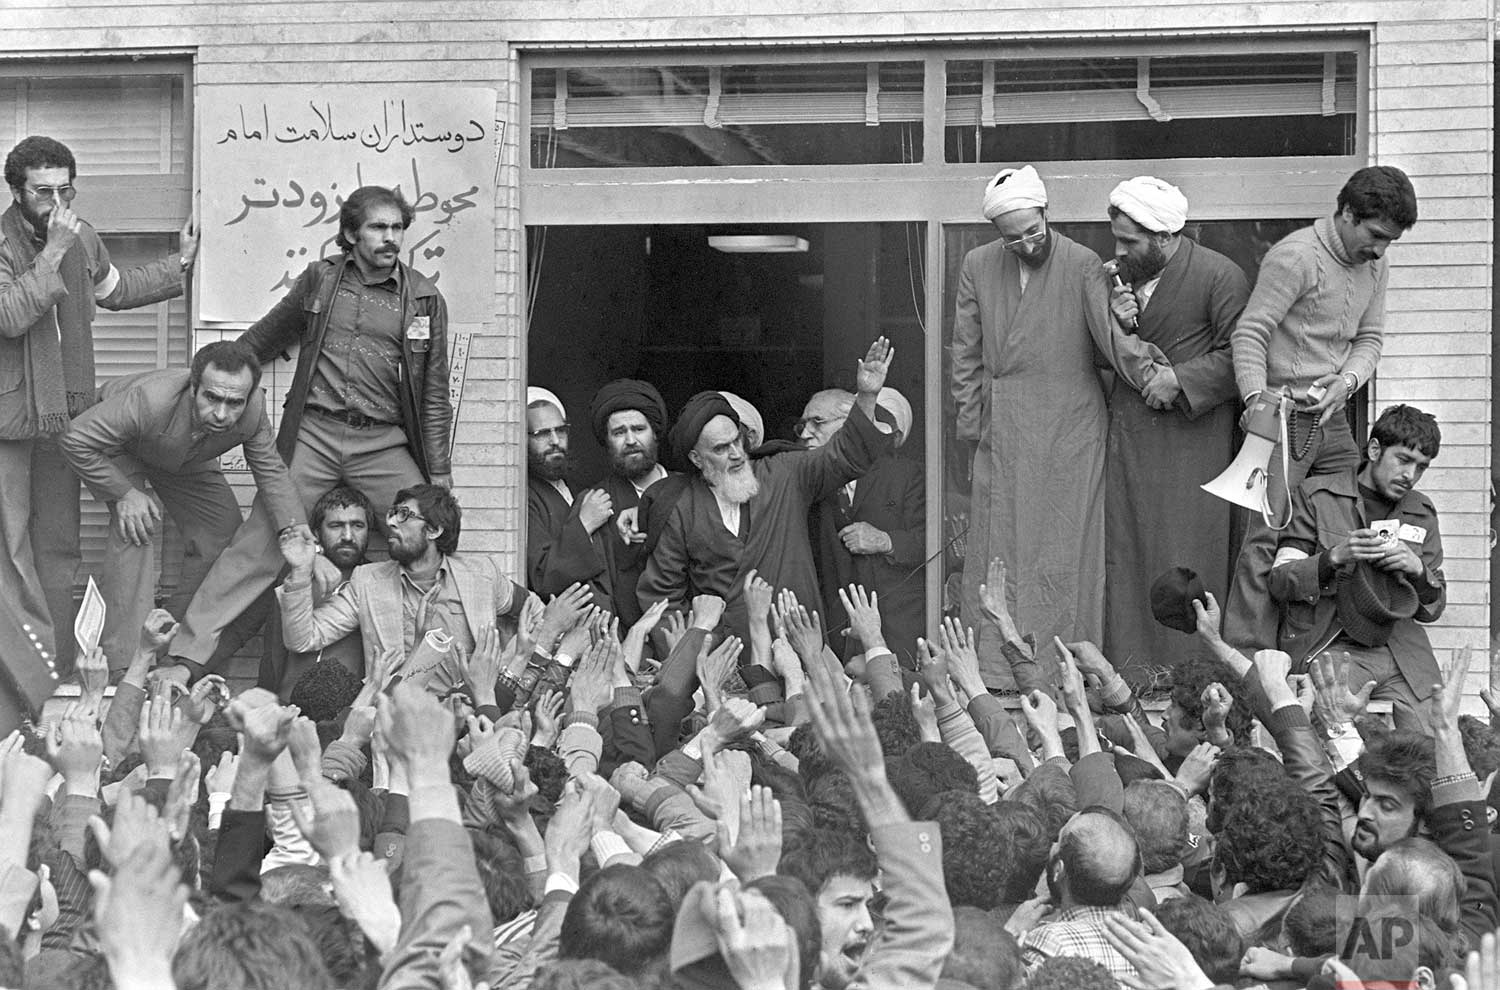  In this Feb. 1, 1979 photo, Ayatollah Ruhollah Khomeini, center, waves to followers as he appears on the balcony of his headquarters in Tehran, Iran. (AP Photo/Campion) 